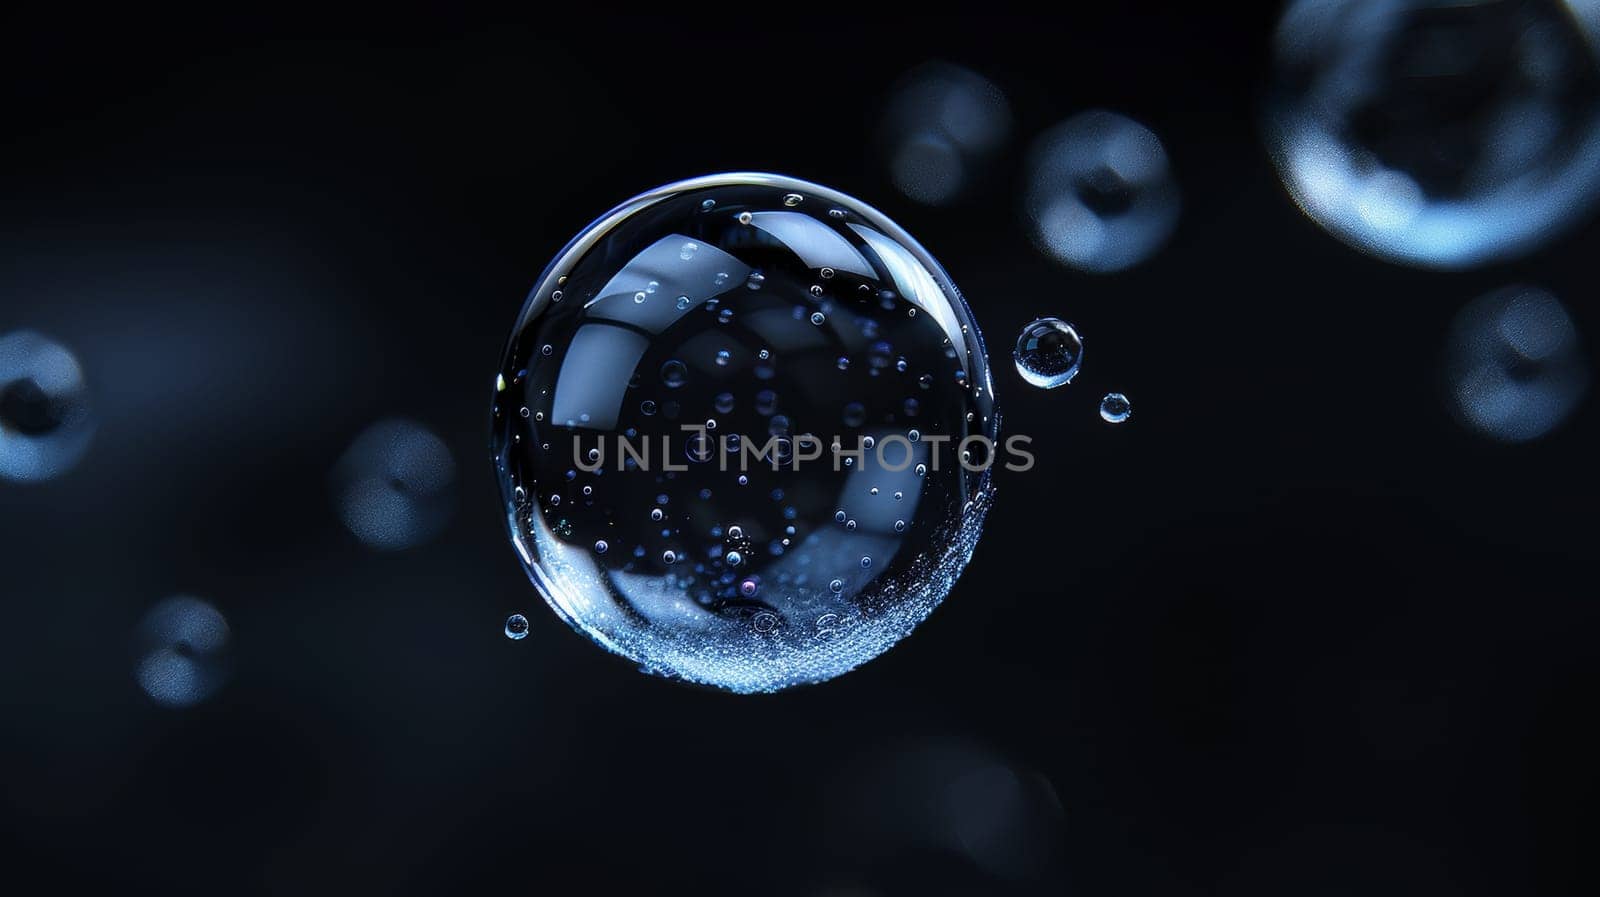 A close up of a clear bubble with many small bubbles surrounding it. The bubbles are all different sizes and are scattered around the main bubble. The image has a calm and serene mood